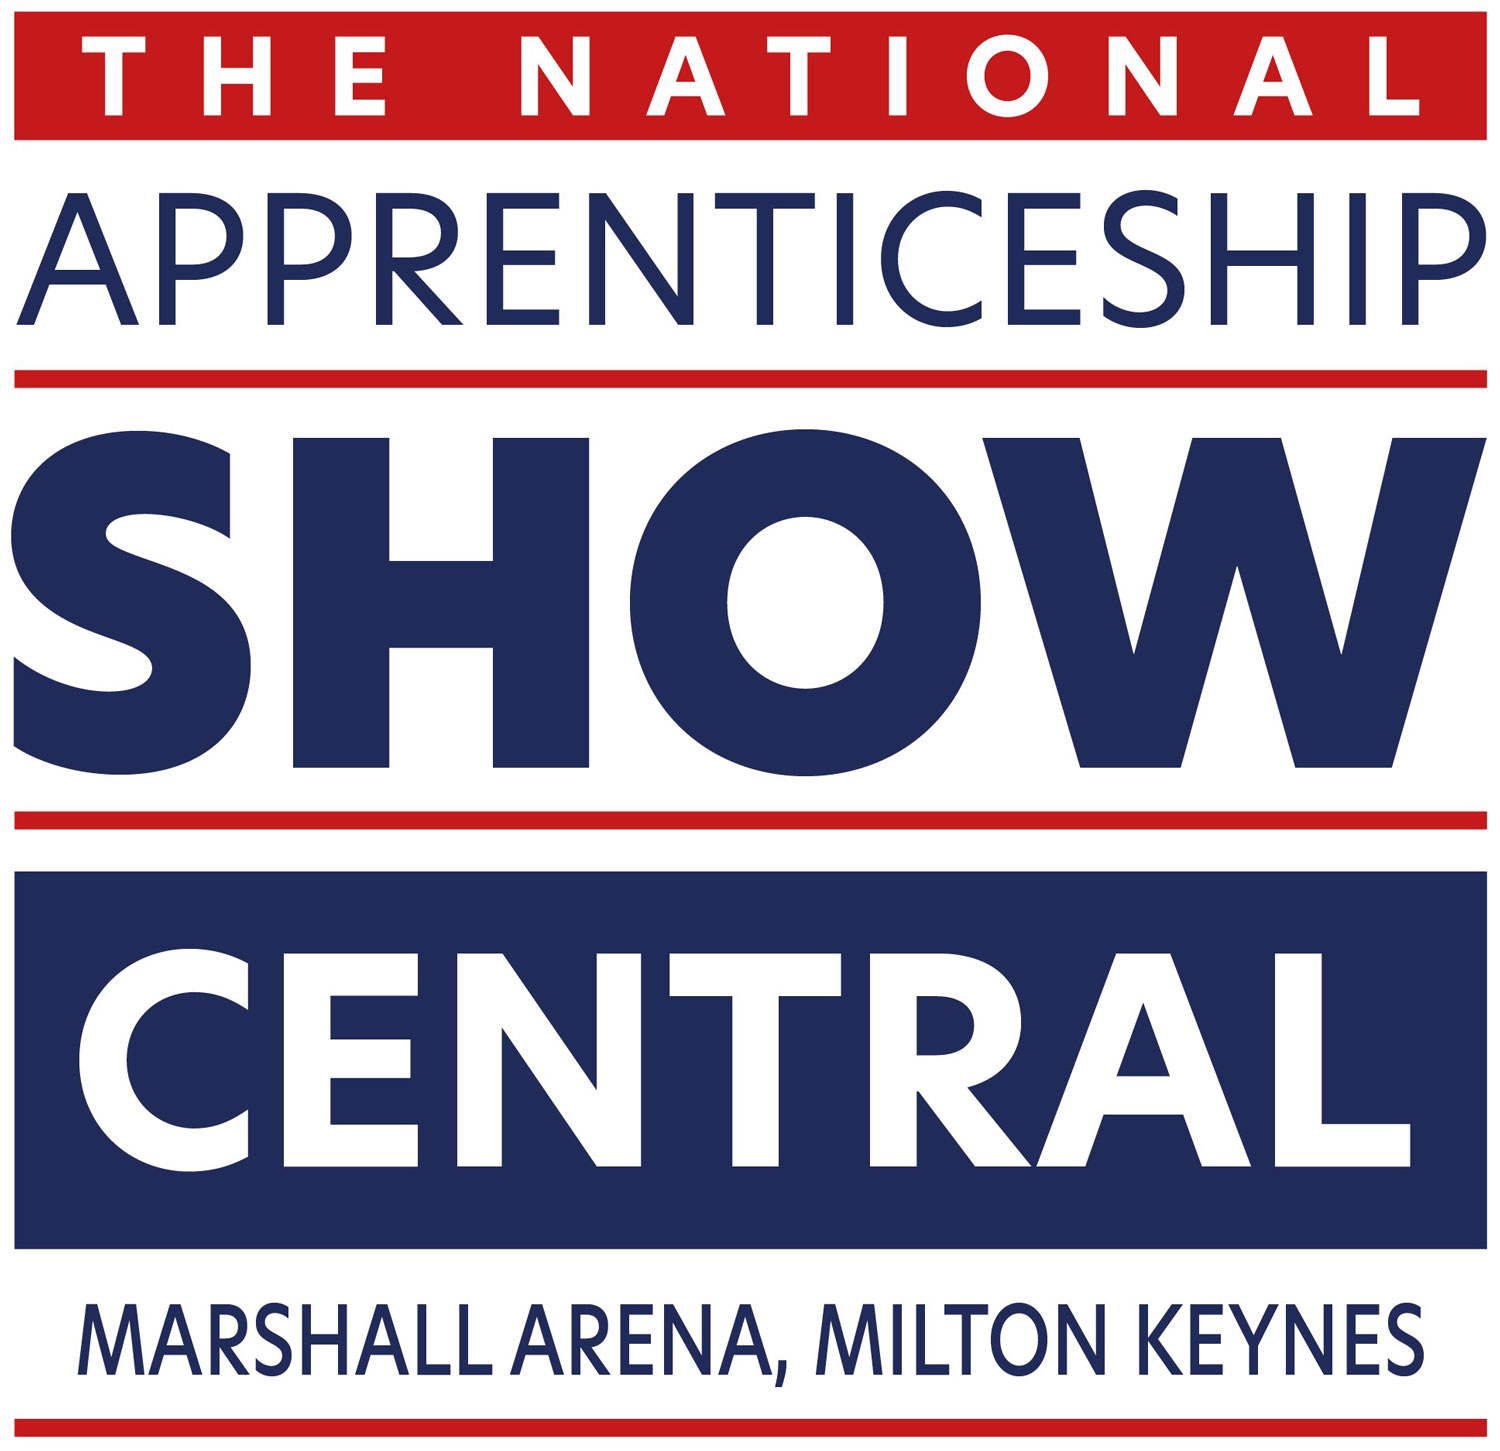 National Apprenticeship Show Central